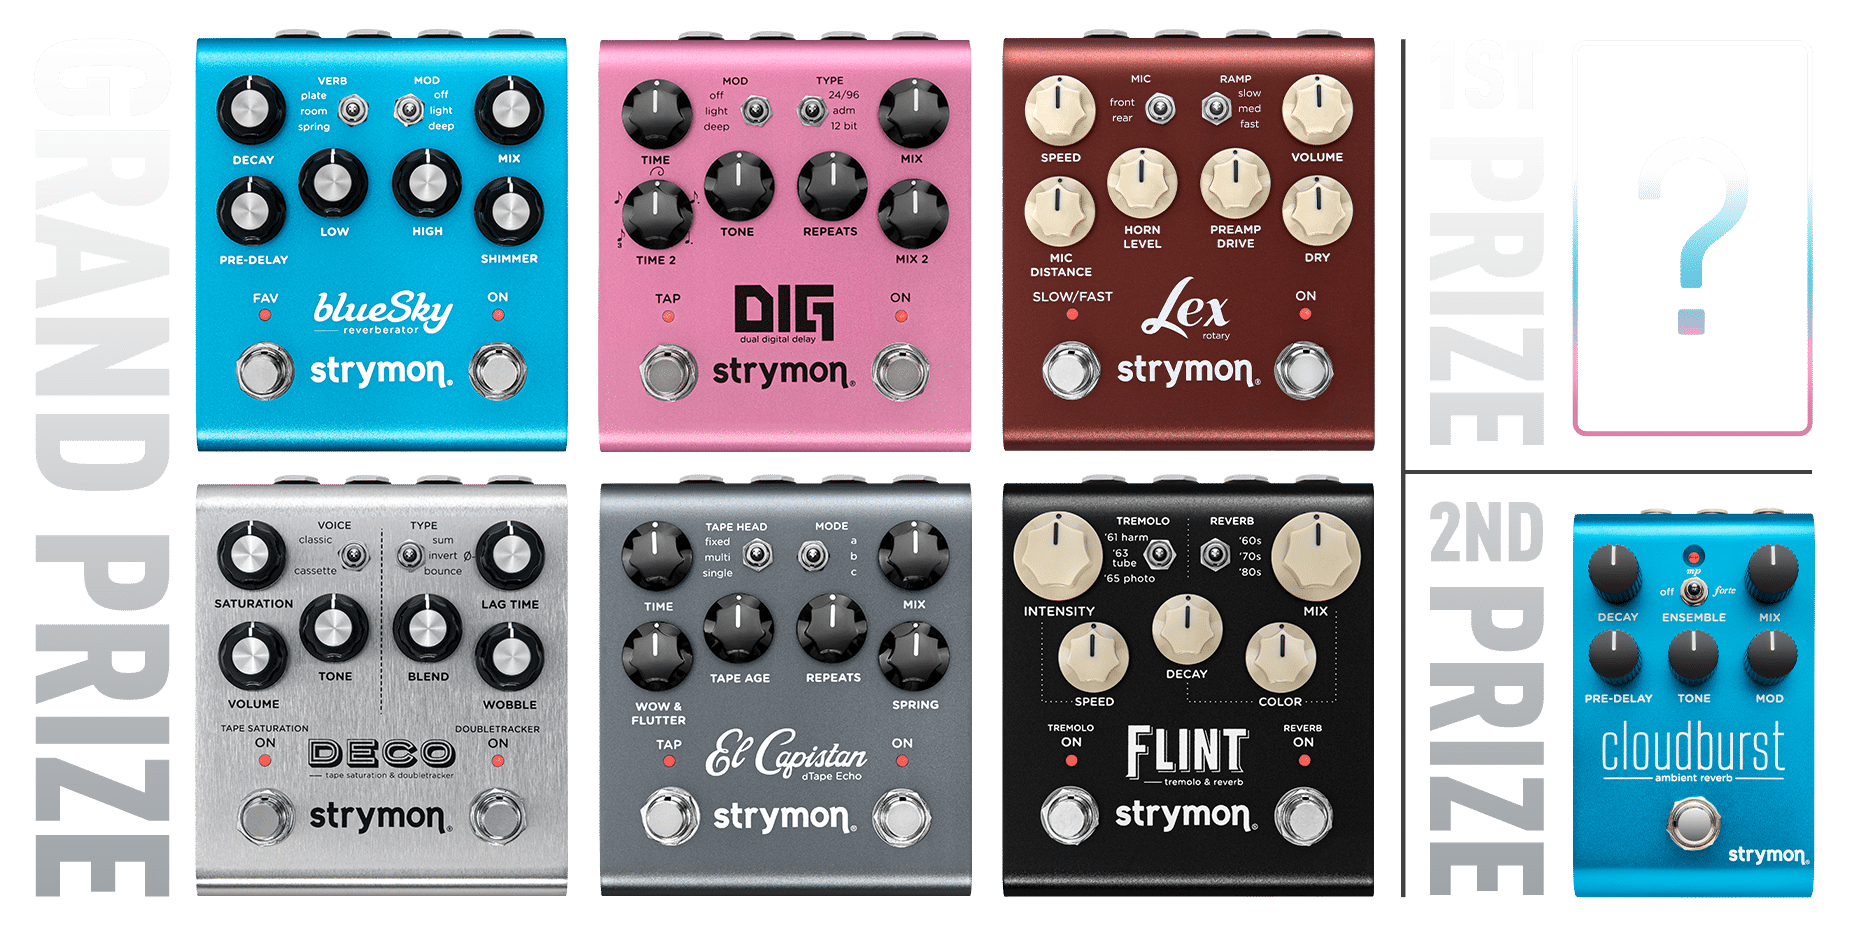 Strymon 2023 Contest Giveaway graphic. Shows the grand prize (blueSky, DIG, Lex, Deco, El Capistan, Flint) 1st prize (winner's choice of any Strymon pedal) and 2nd prize (Cloudburst)